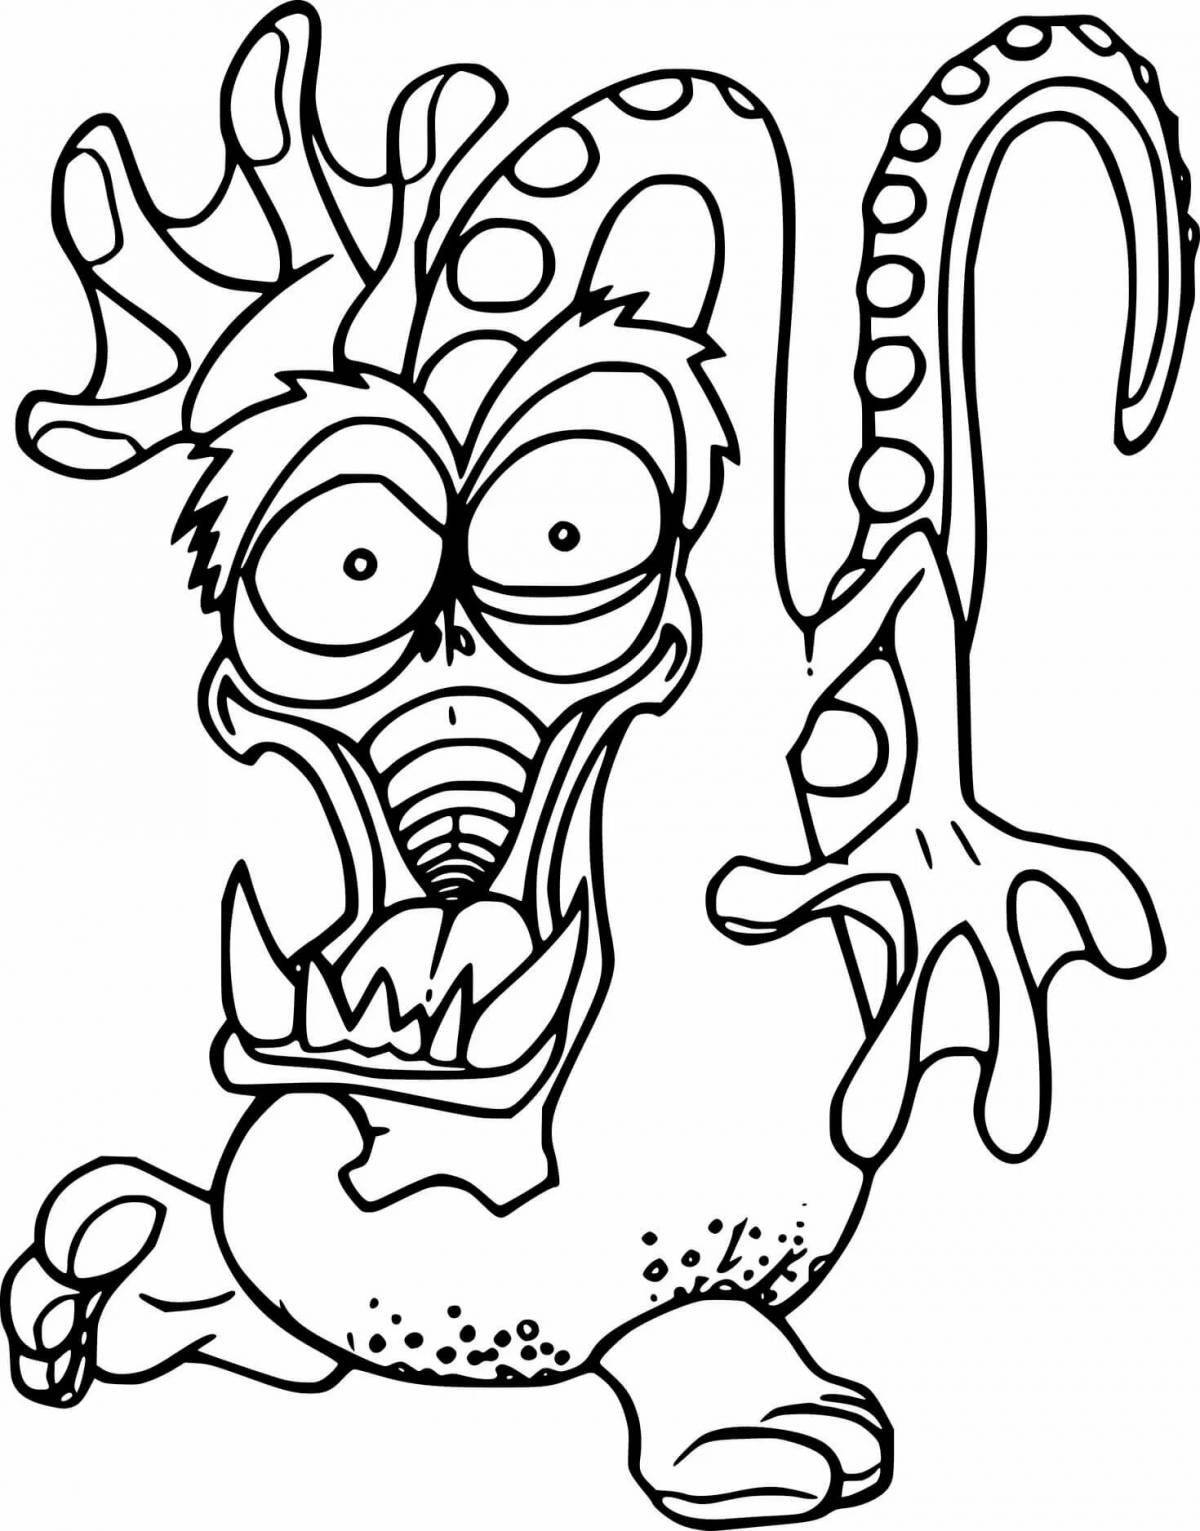 Ugly coloring pages monsters from the door